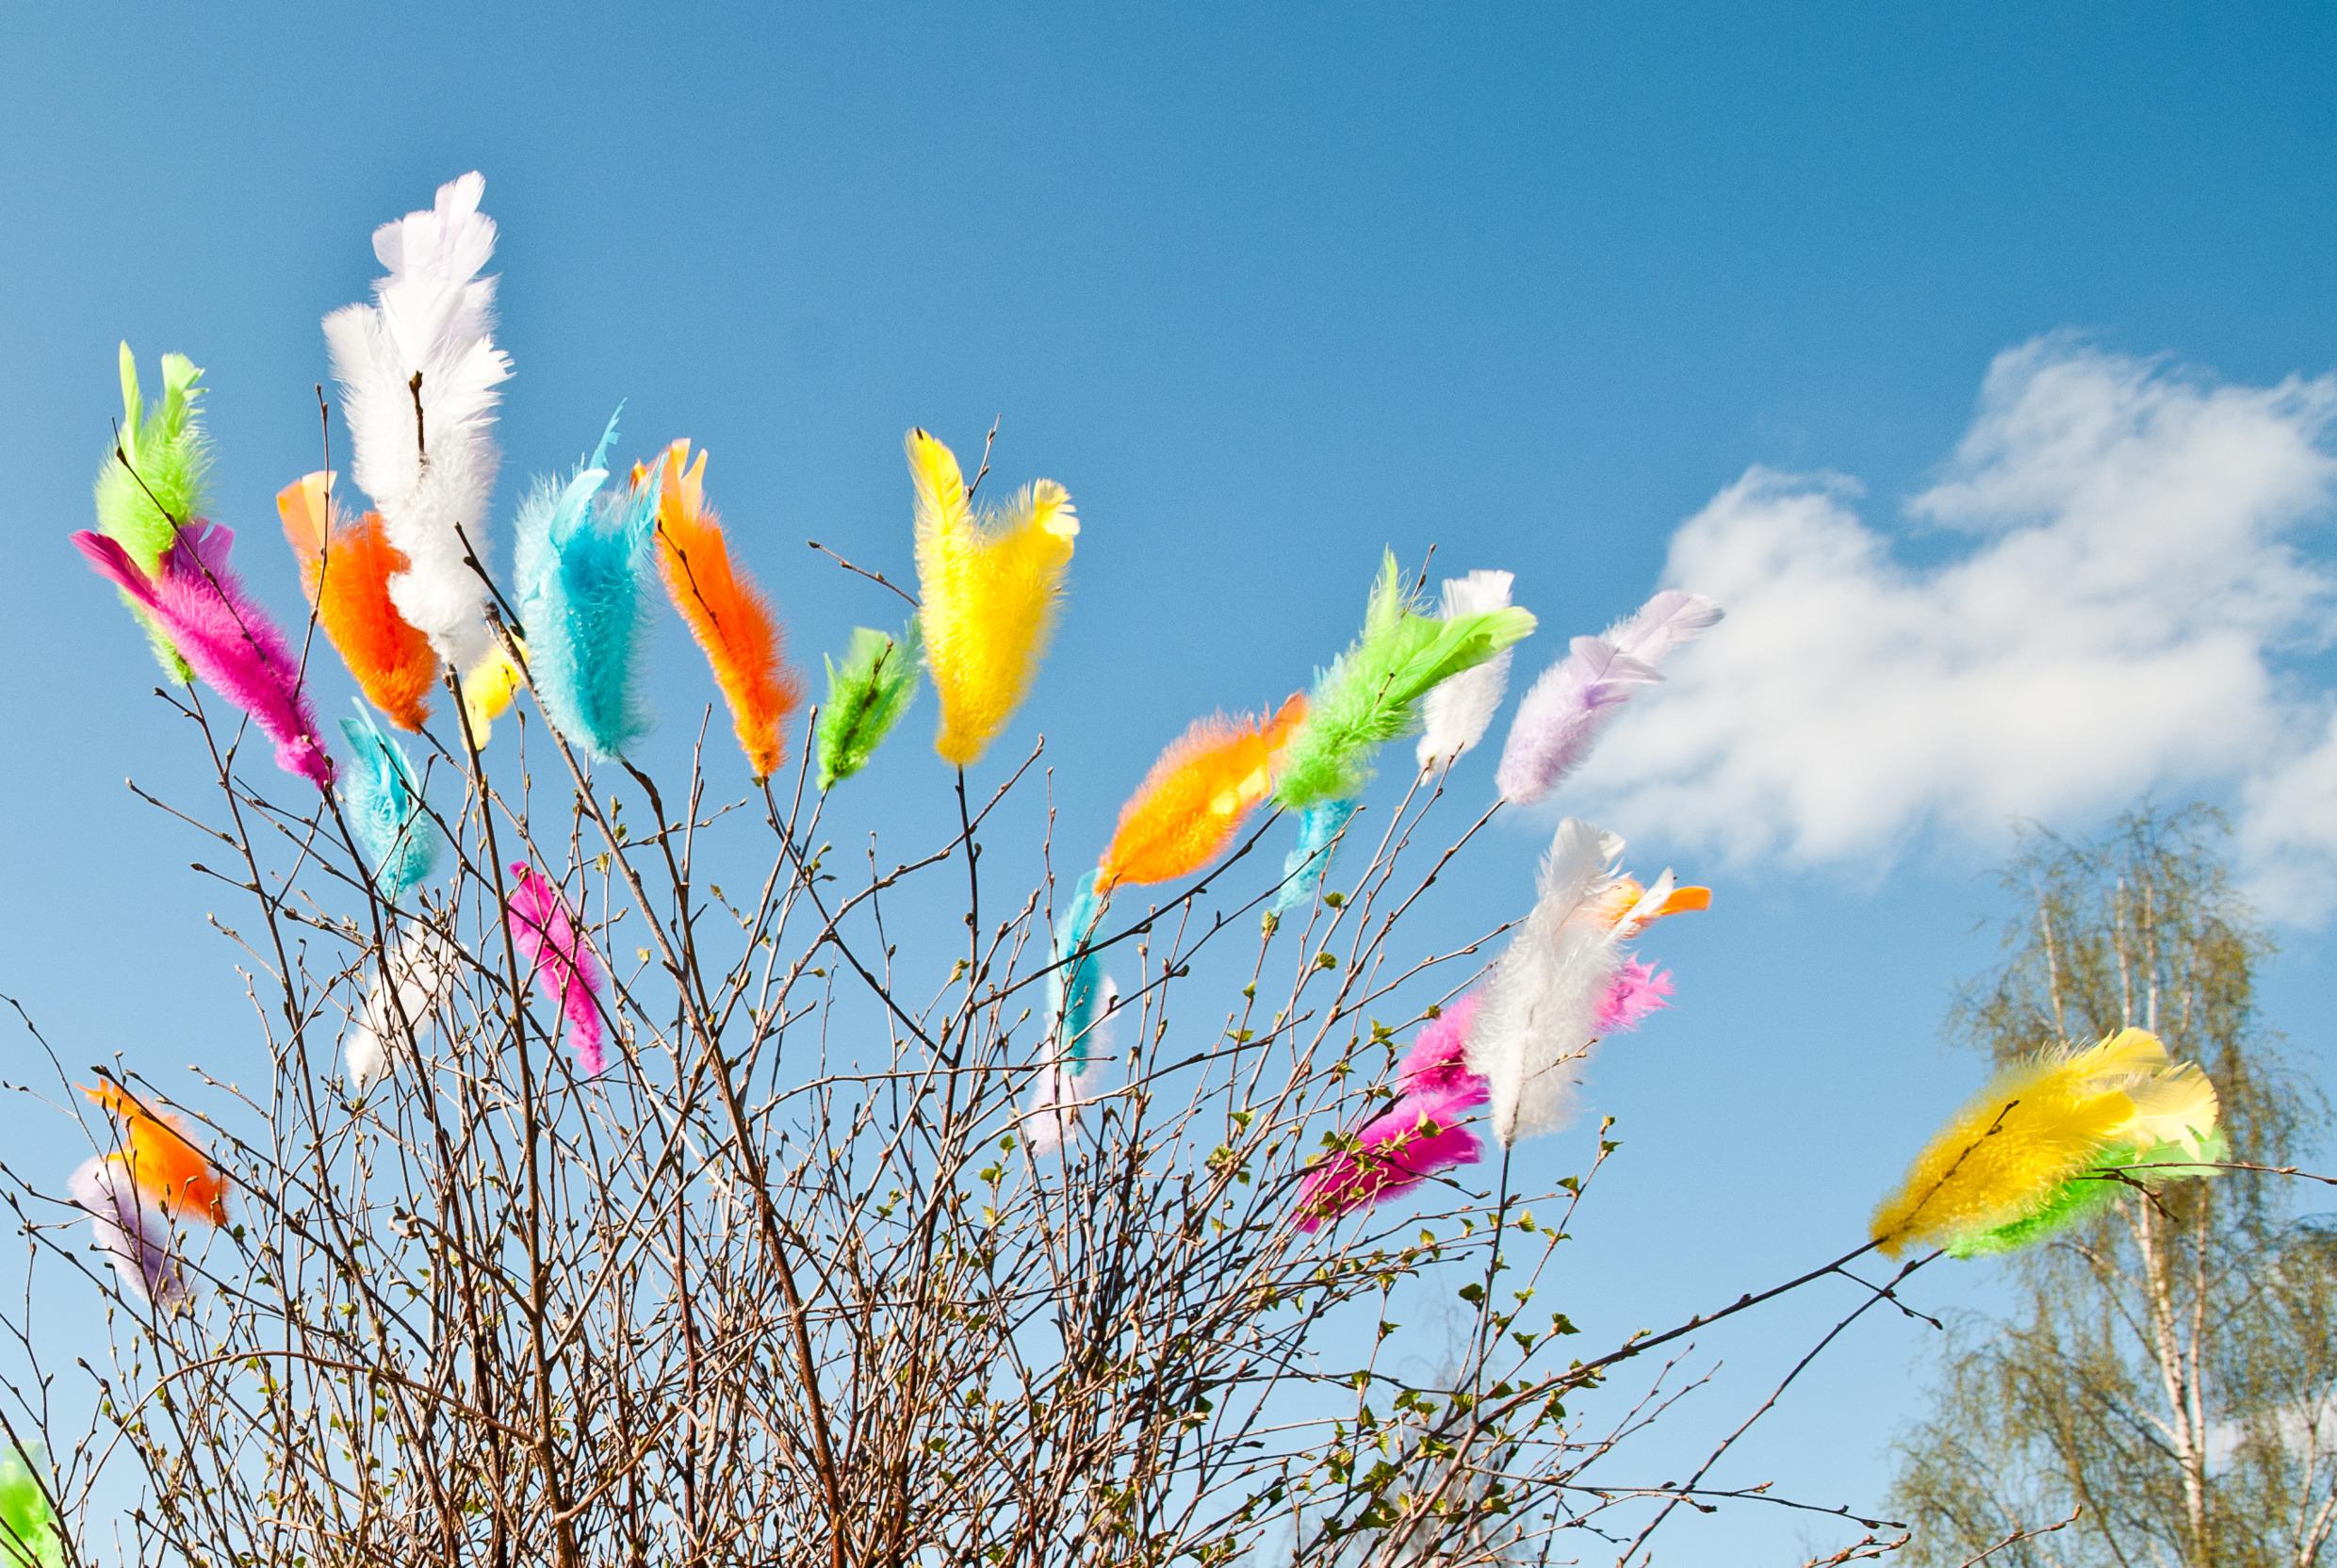 Twigs decorated with colourful feathers. Typical at Easter in Sweden.